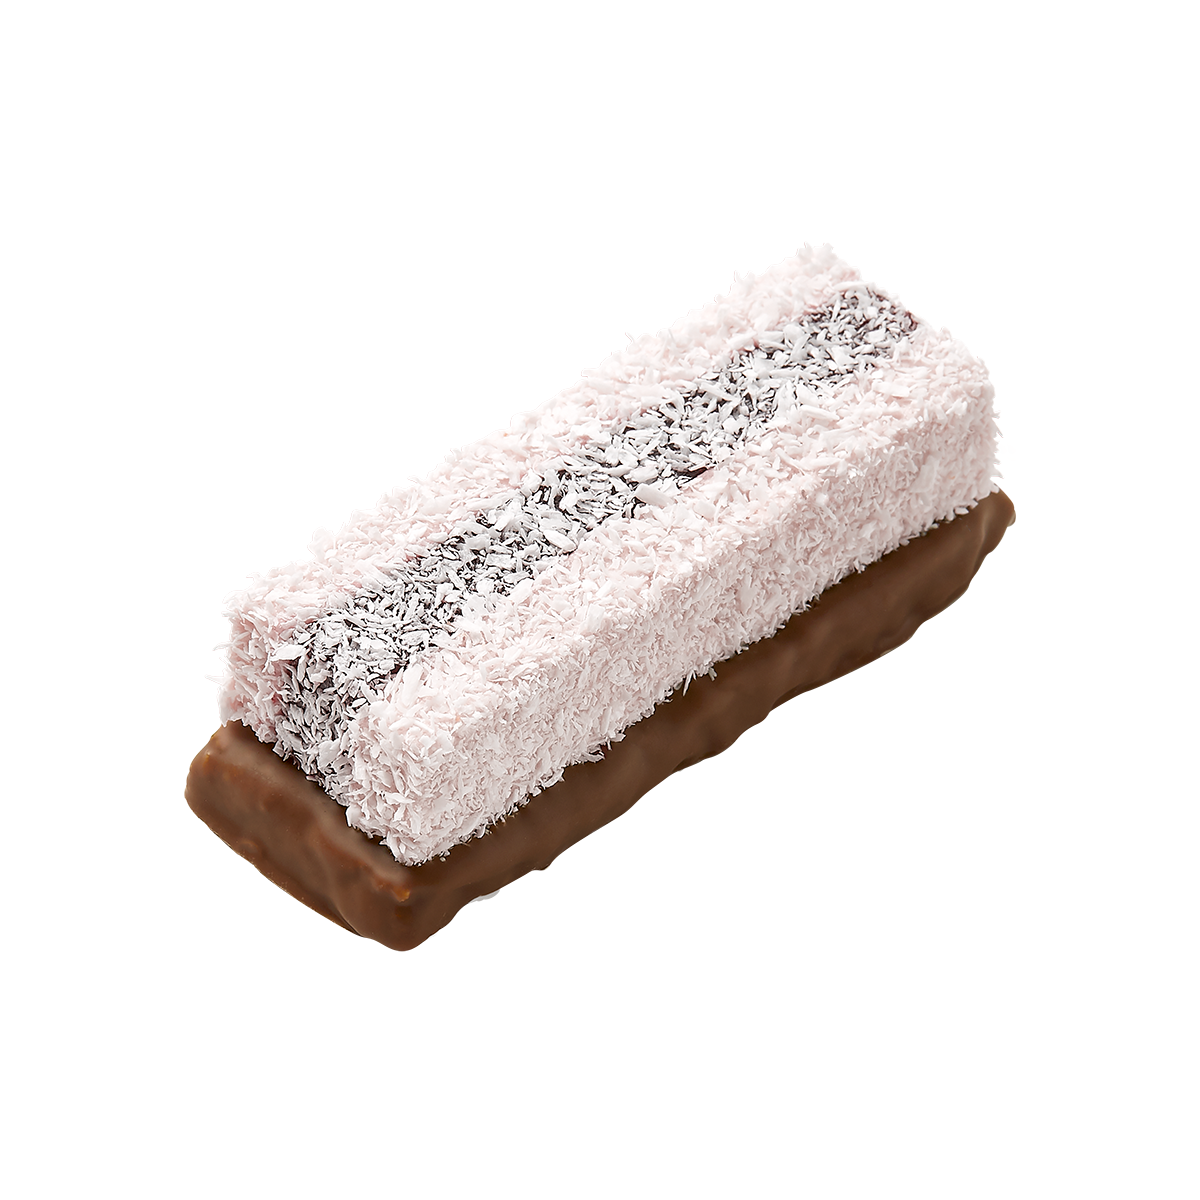 Coconut covered slice with jelly through centre